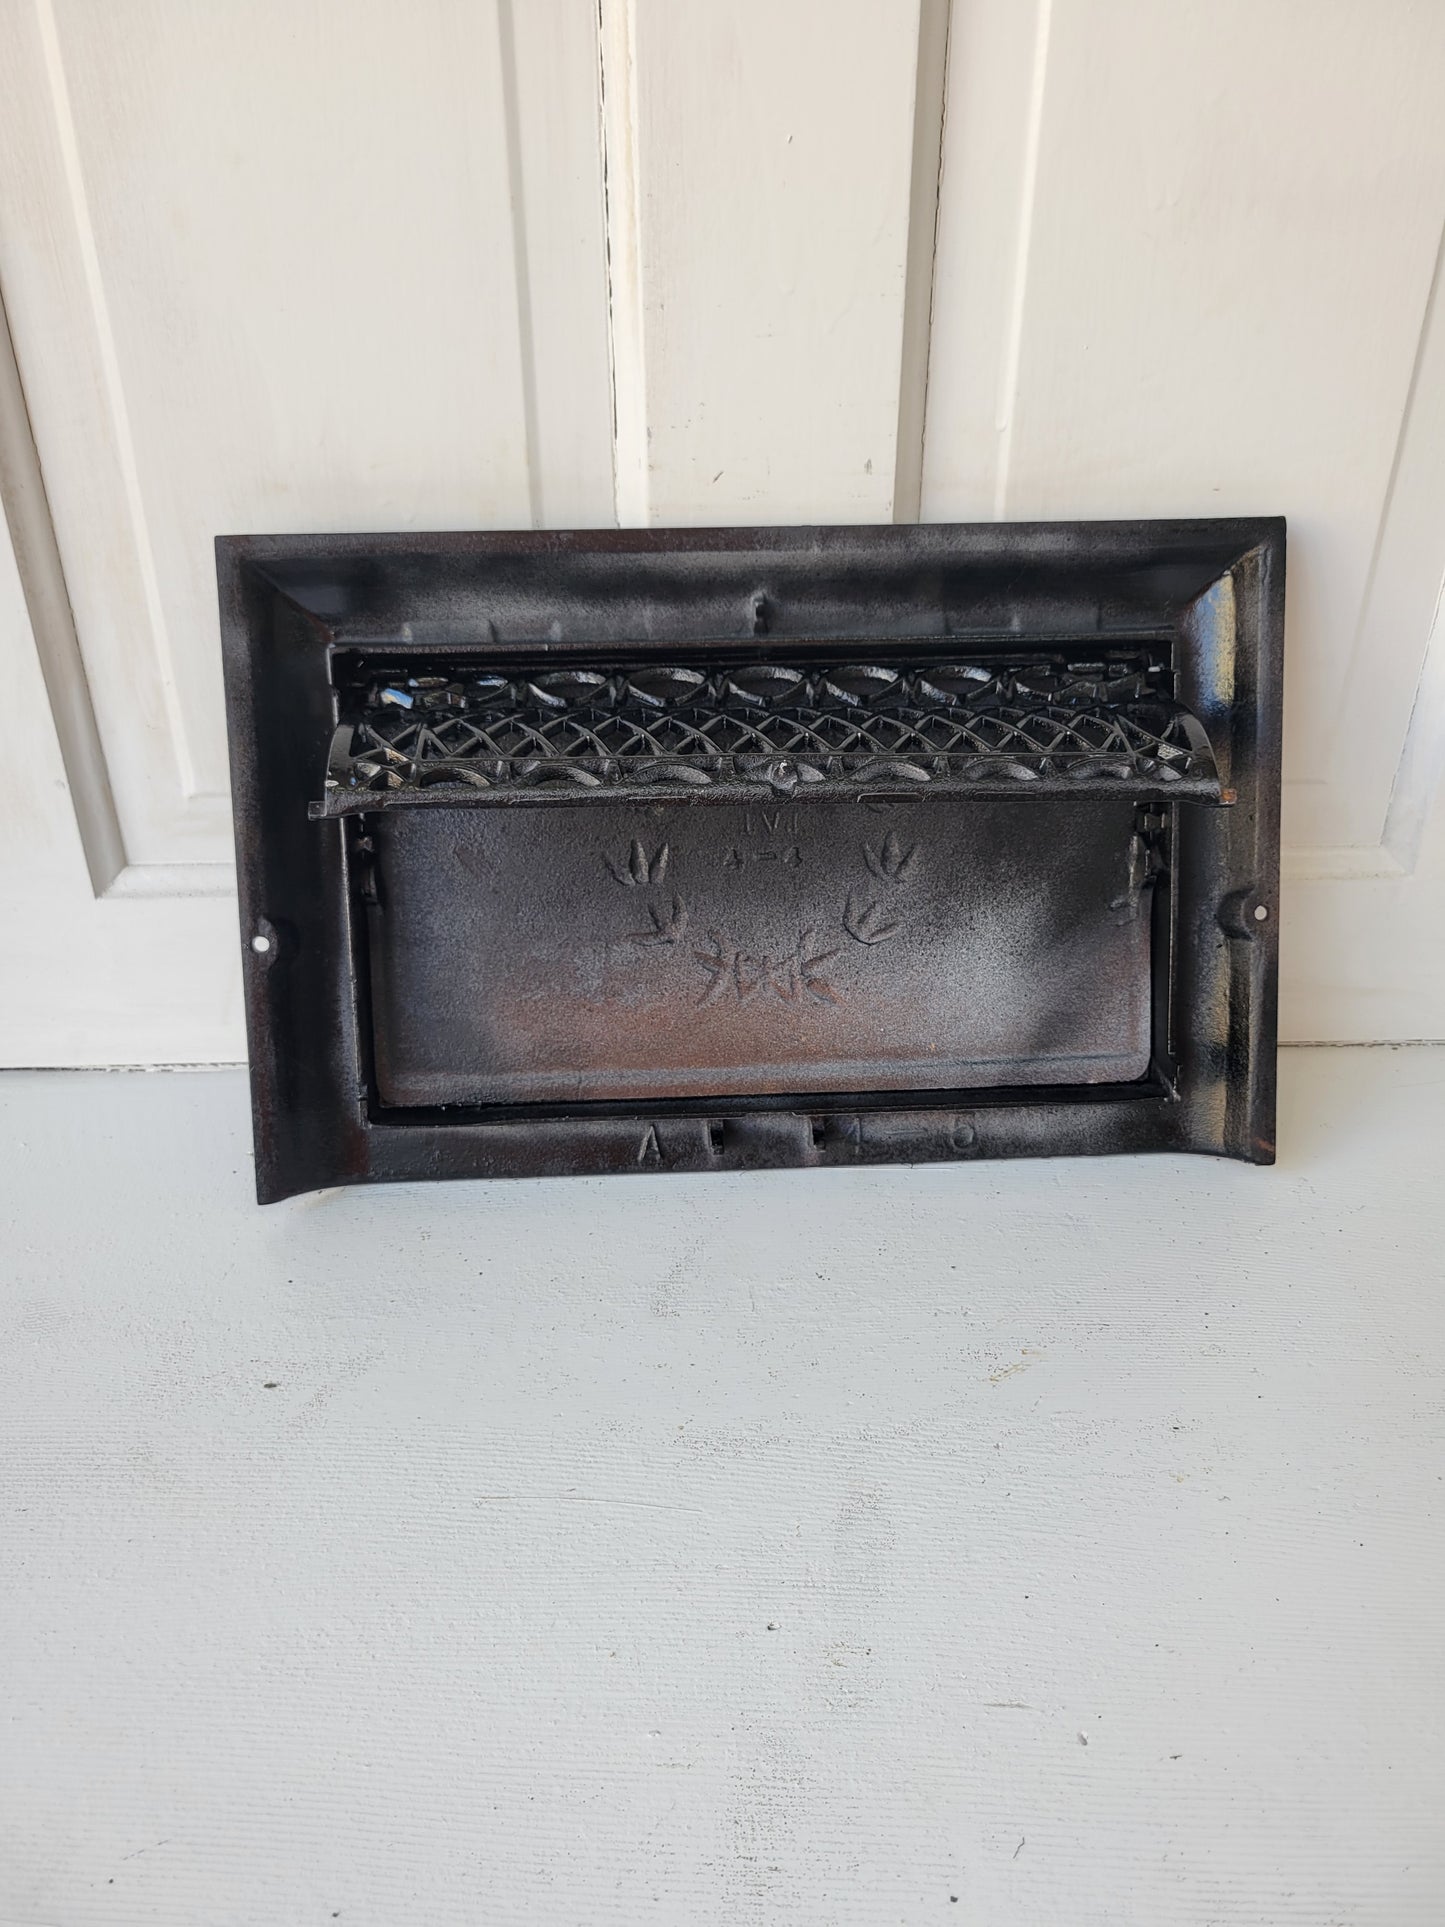 10 x 16 Fancy Cast Iron Fold Out Vent Cover, Antique Floor Register Cover with Dampers #072902